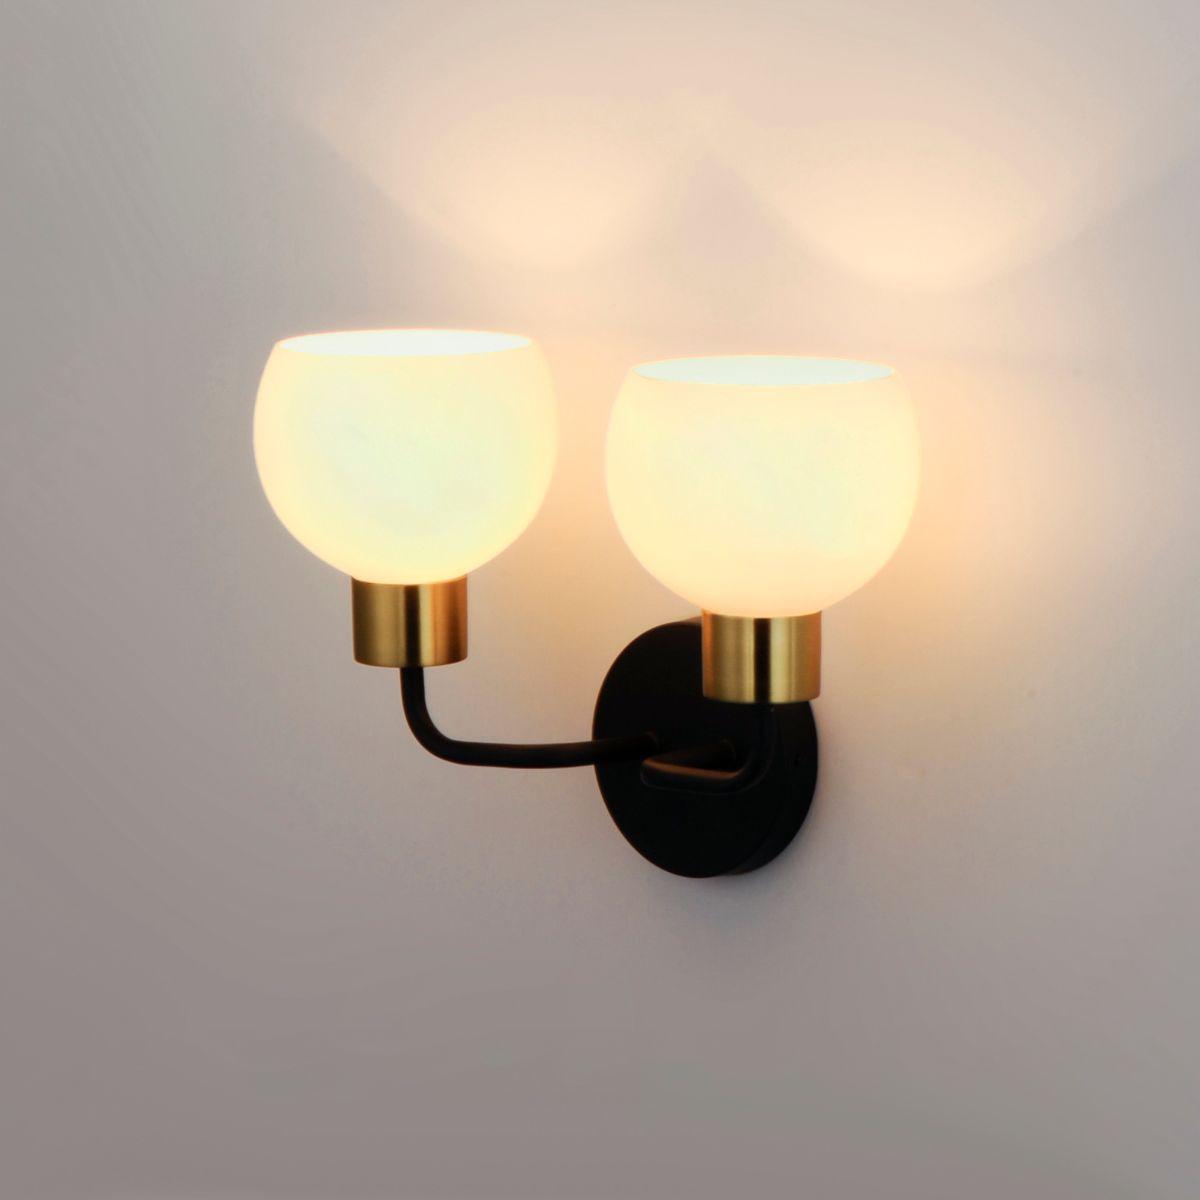 Coraline 15 in. Armed Sconce